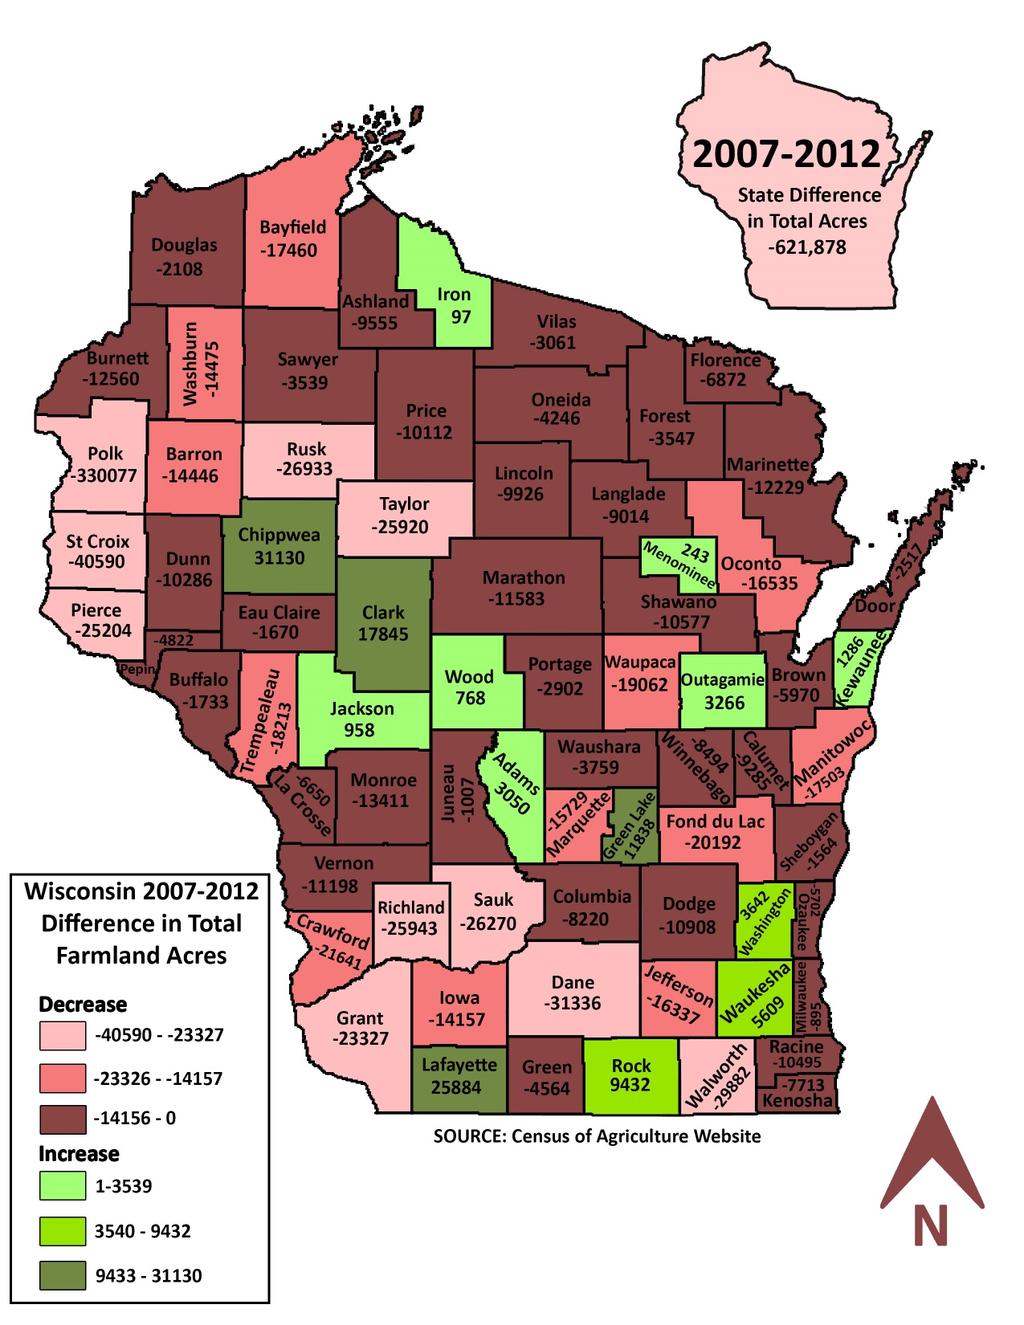 Acres in Farms - Difference Statewide Average Decline per